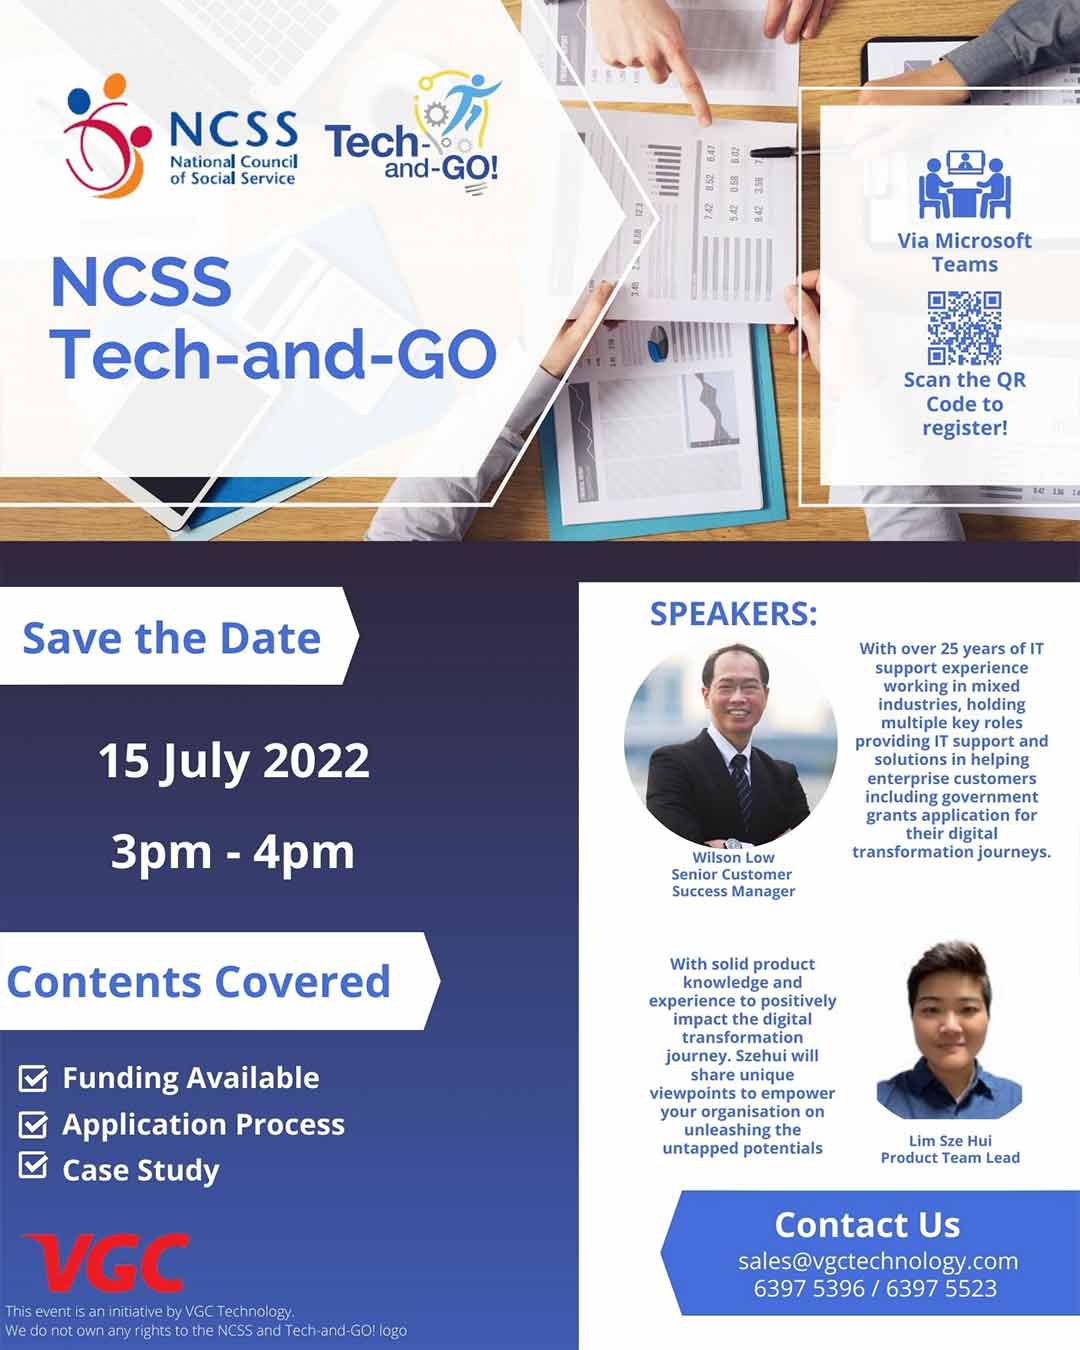 NCSS Tech and Go